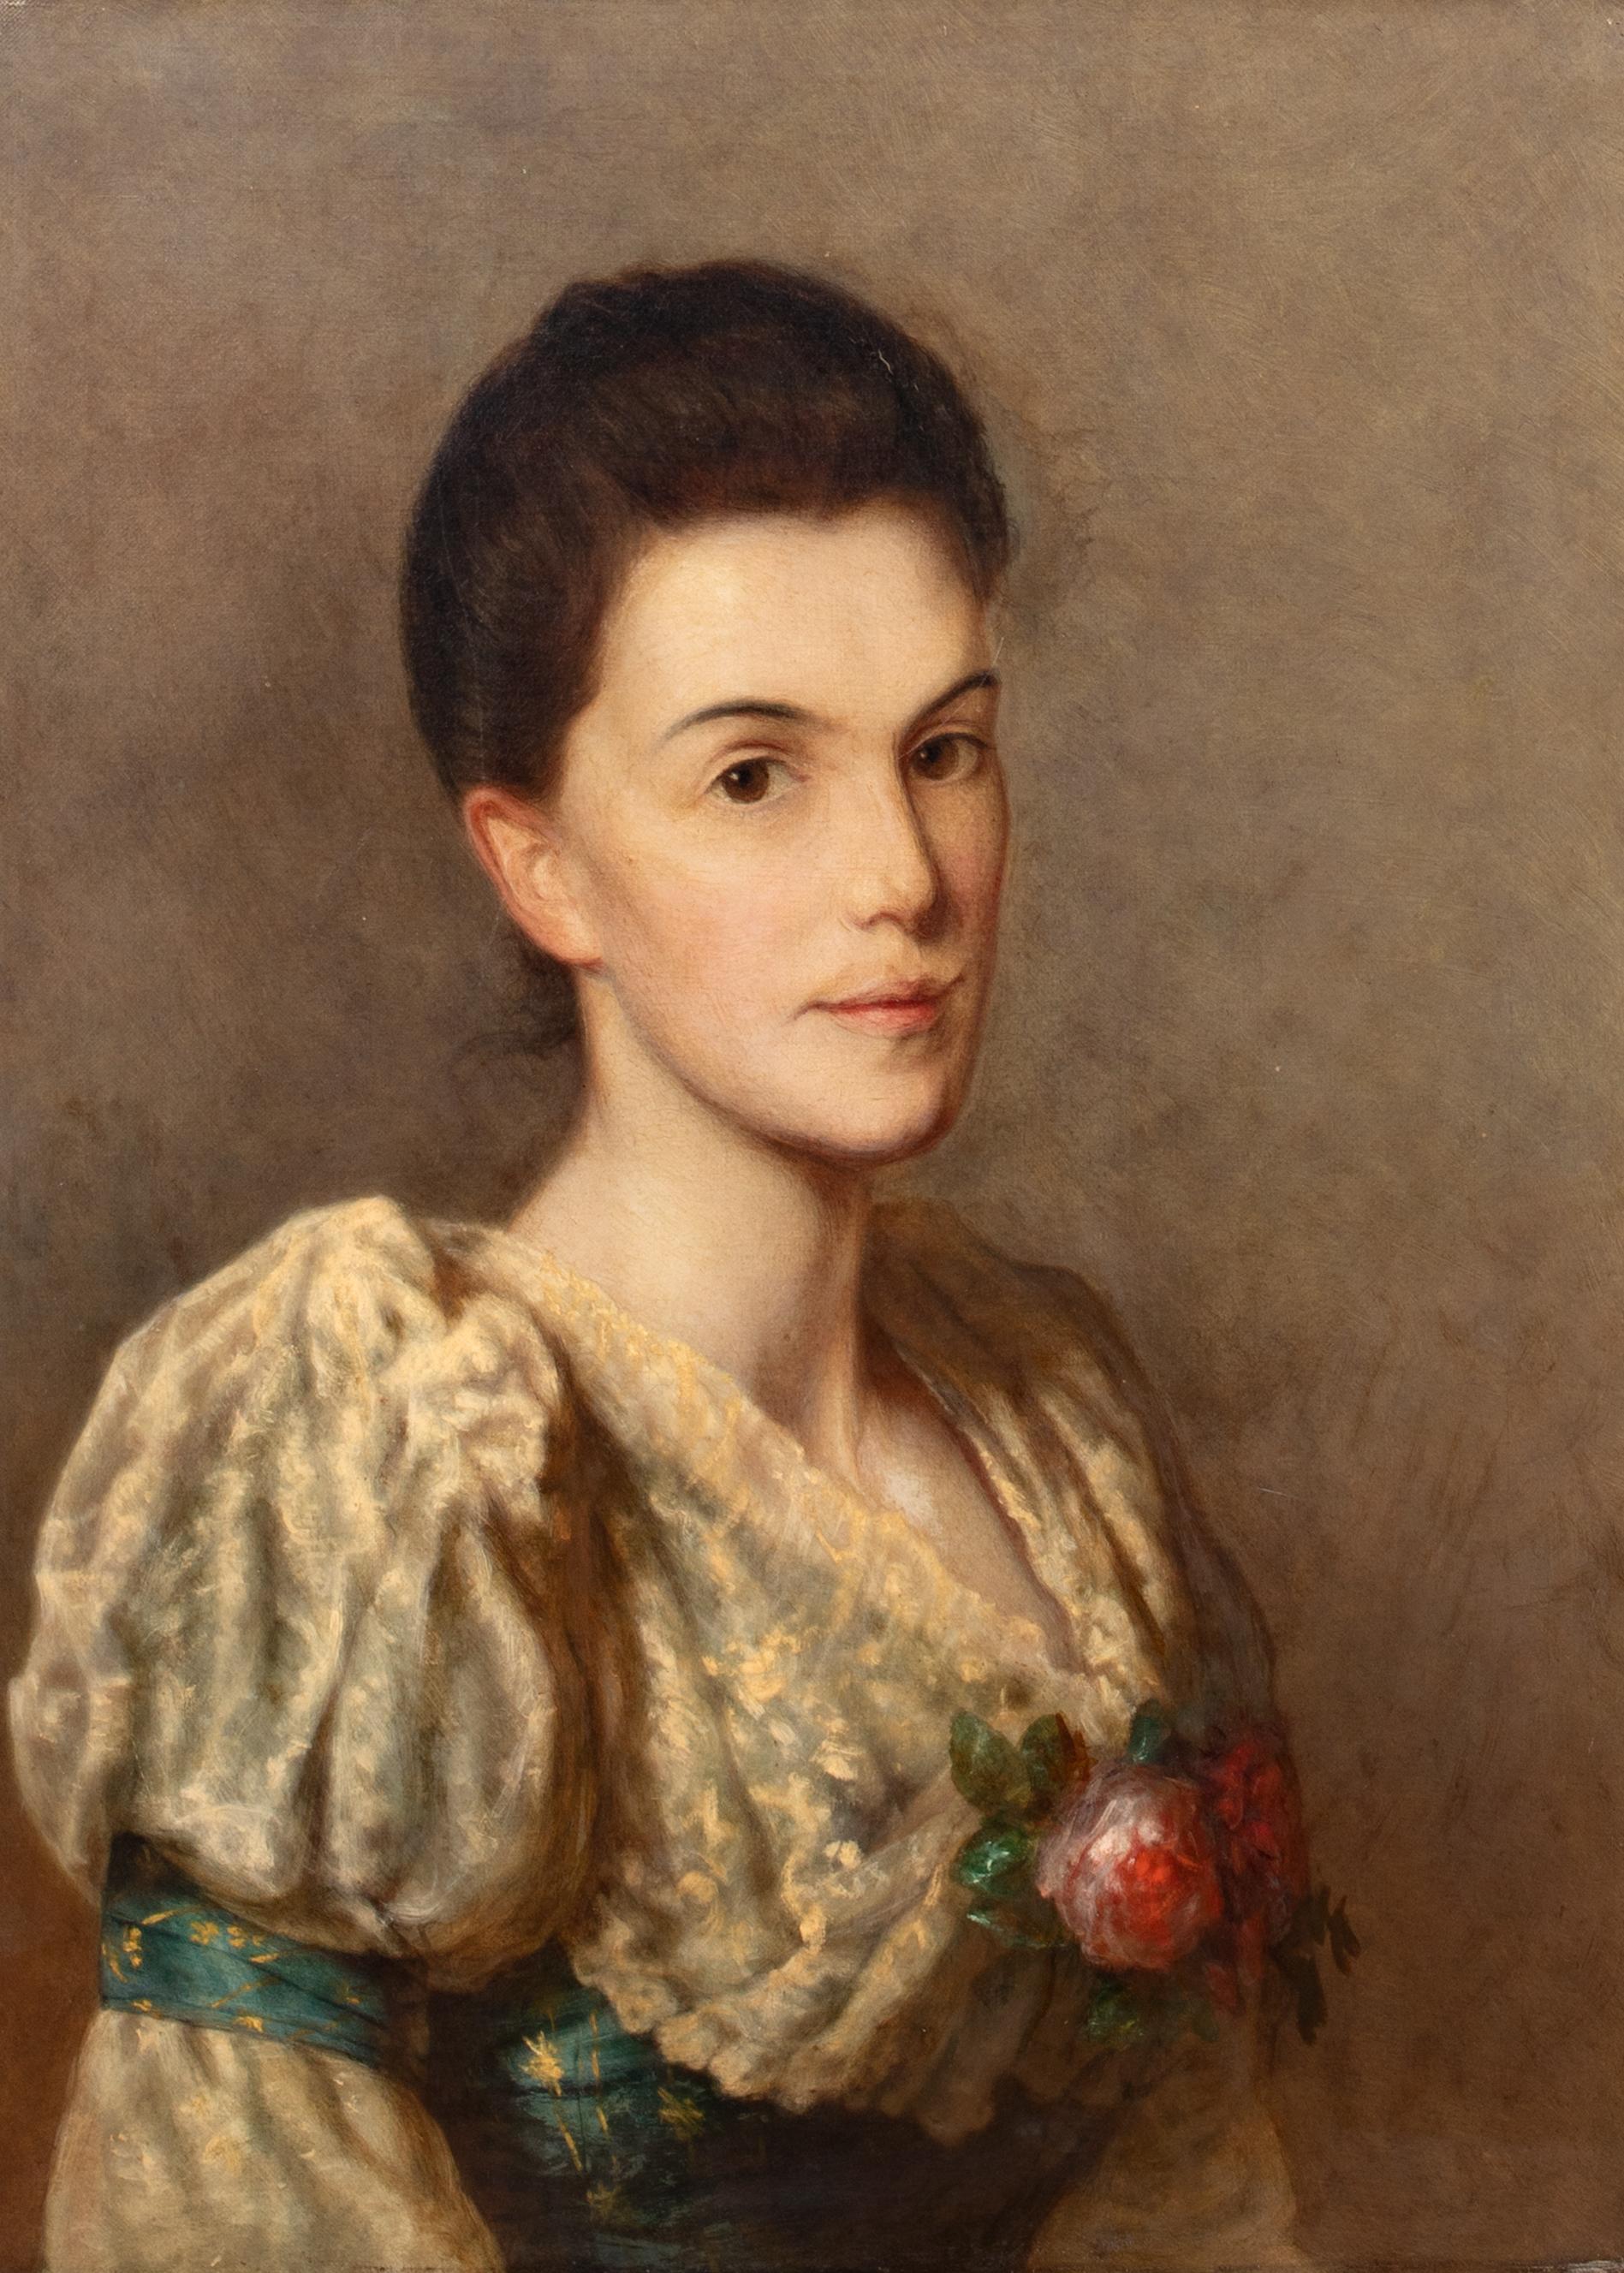 PORTRAIT Of ADELAIDE GRAGG (NEE GILLIAT) OF LONDON HOUSE THREEKINGHAM LINCOLN

circle of Lord Frederick LEIGHTON (1830-1896)

Large 19th Century portrait of Adelaide Cragg of the Lincolnshire Yeomanry, oil on canvas. Excellent quality and condition